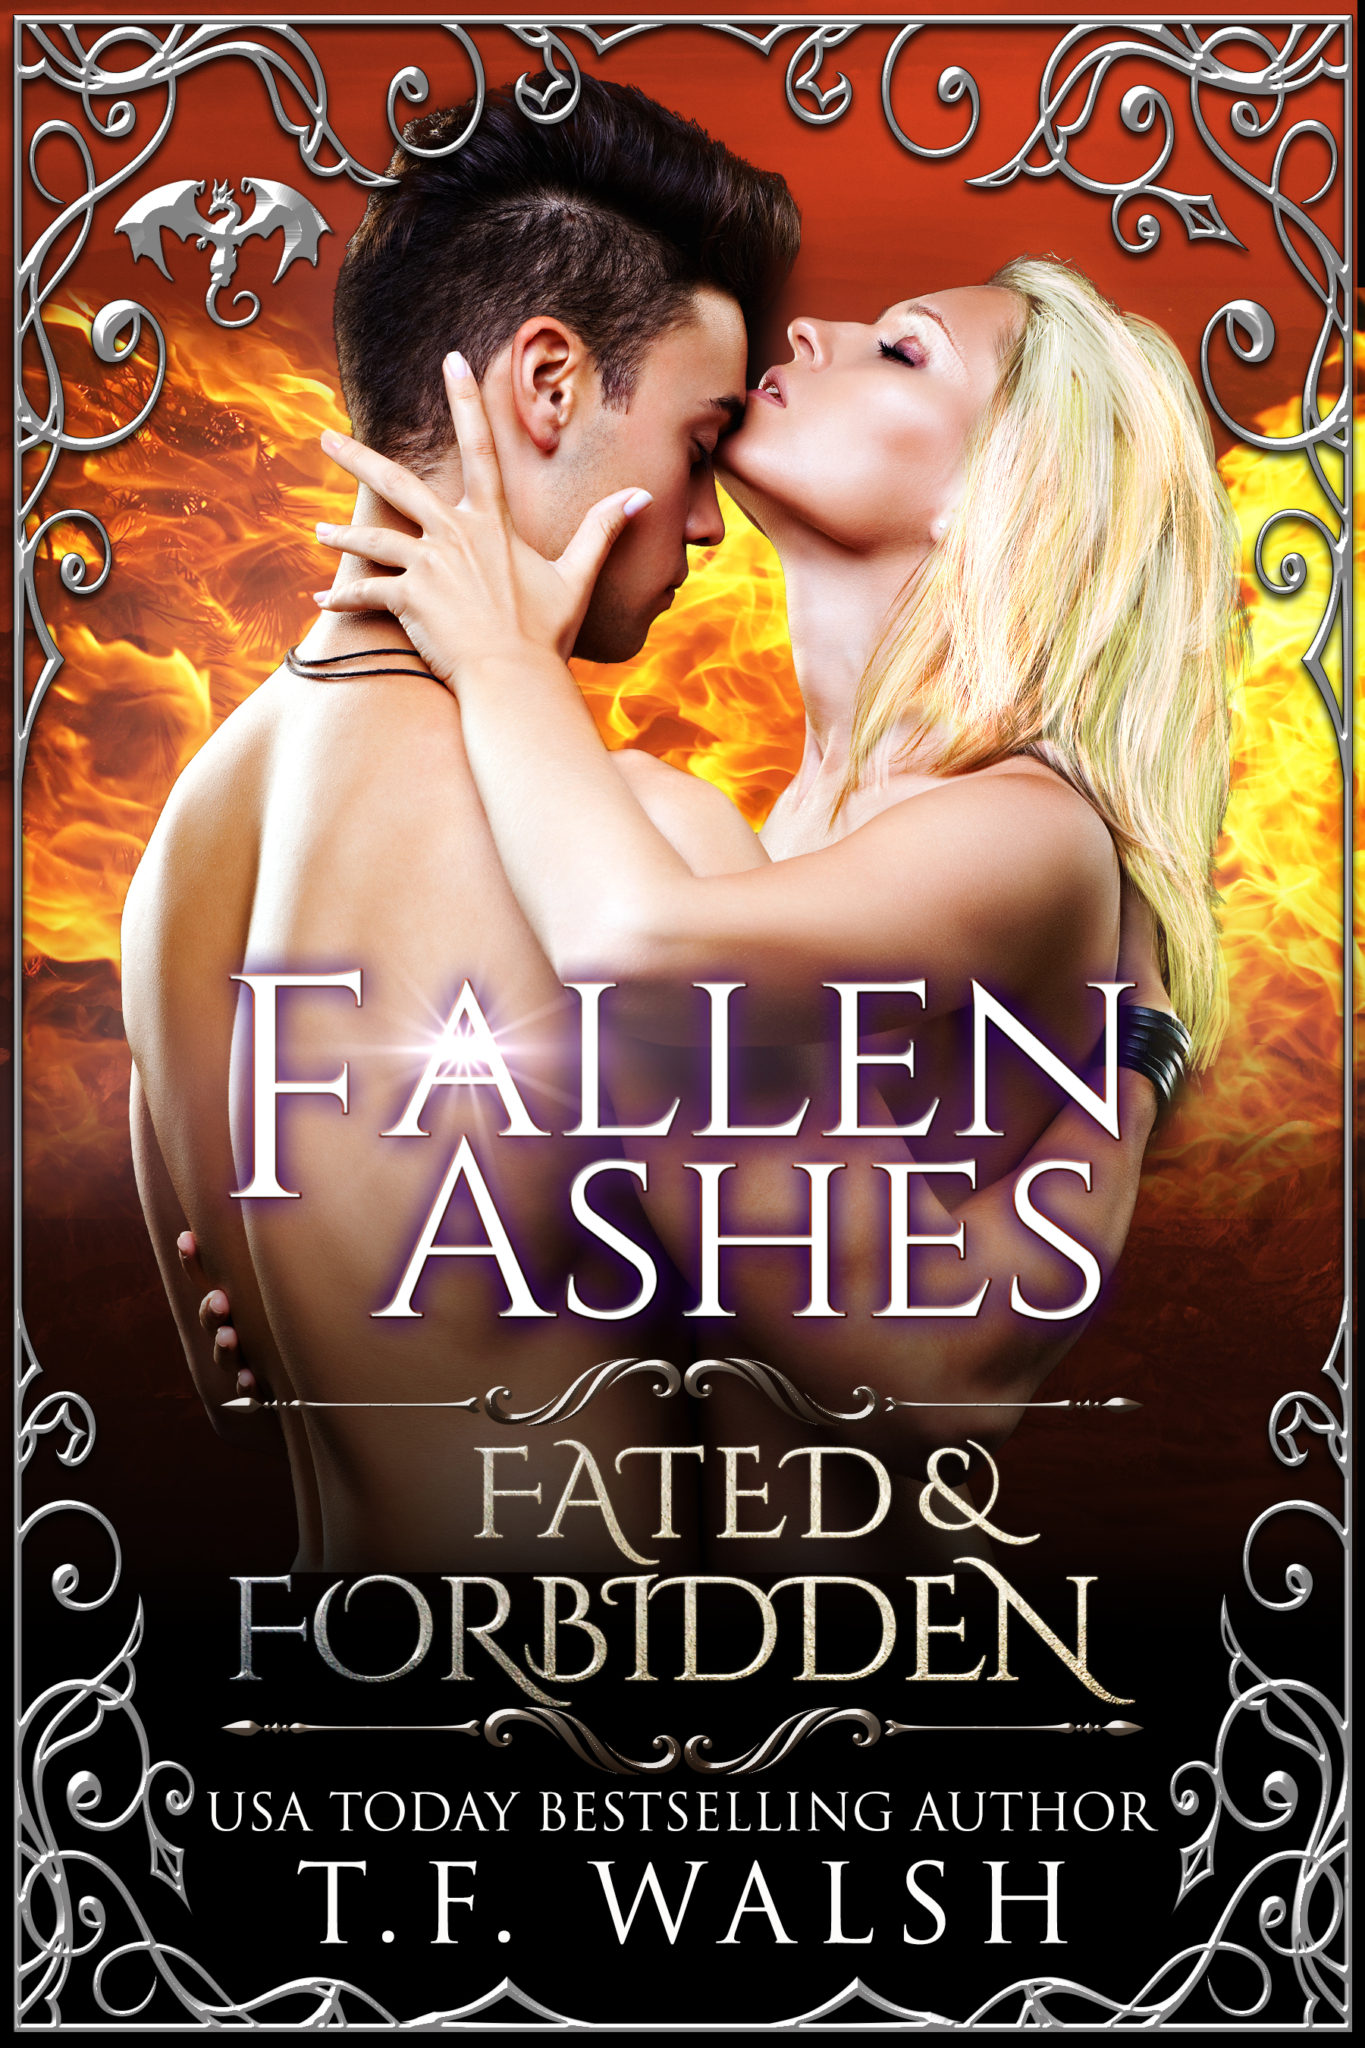 FREE: Fallen Ashes by T.F. Walsh